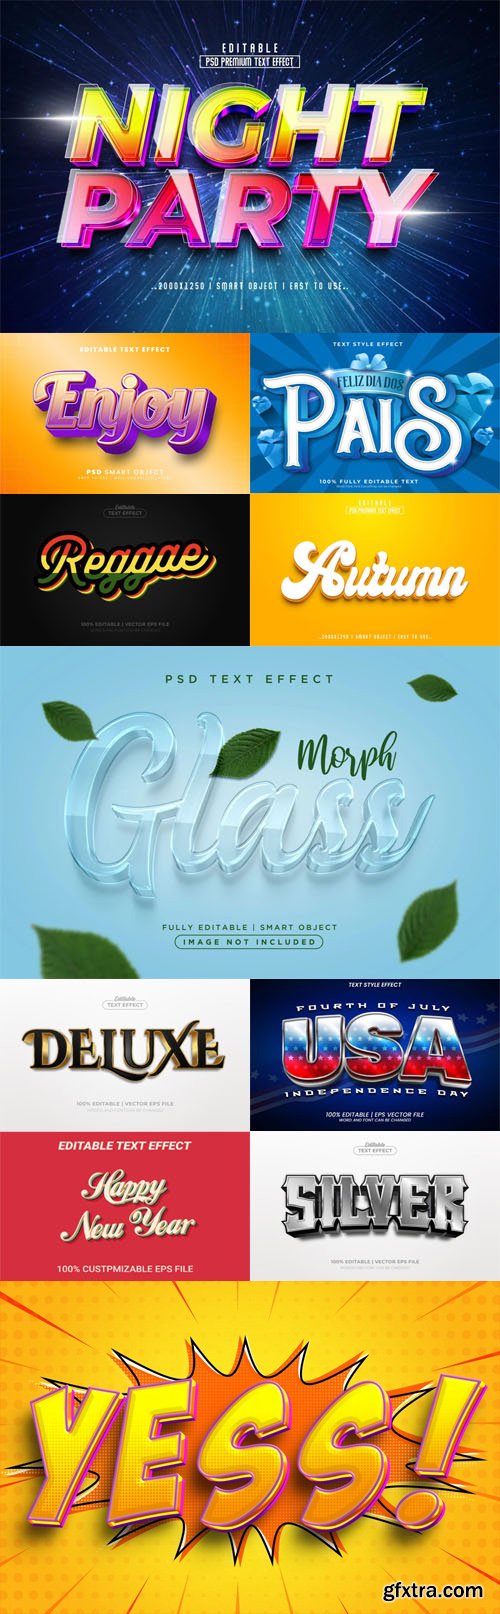 25+ New Editable Text Effects for Photoshop